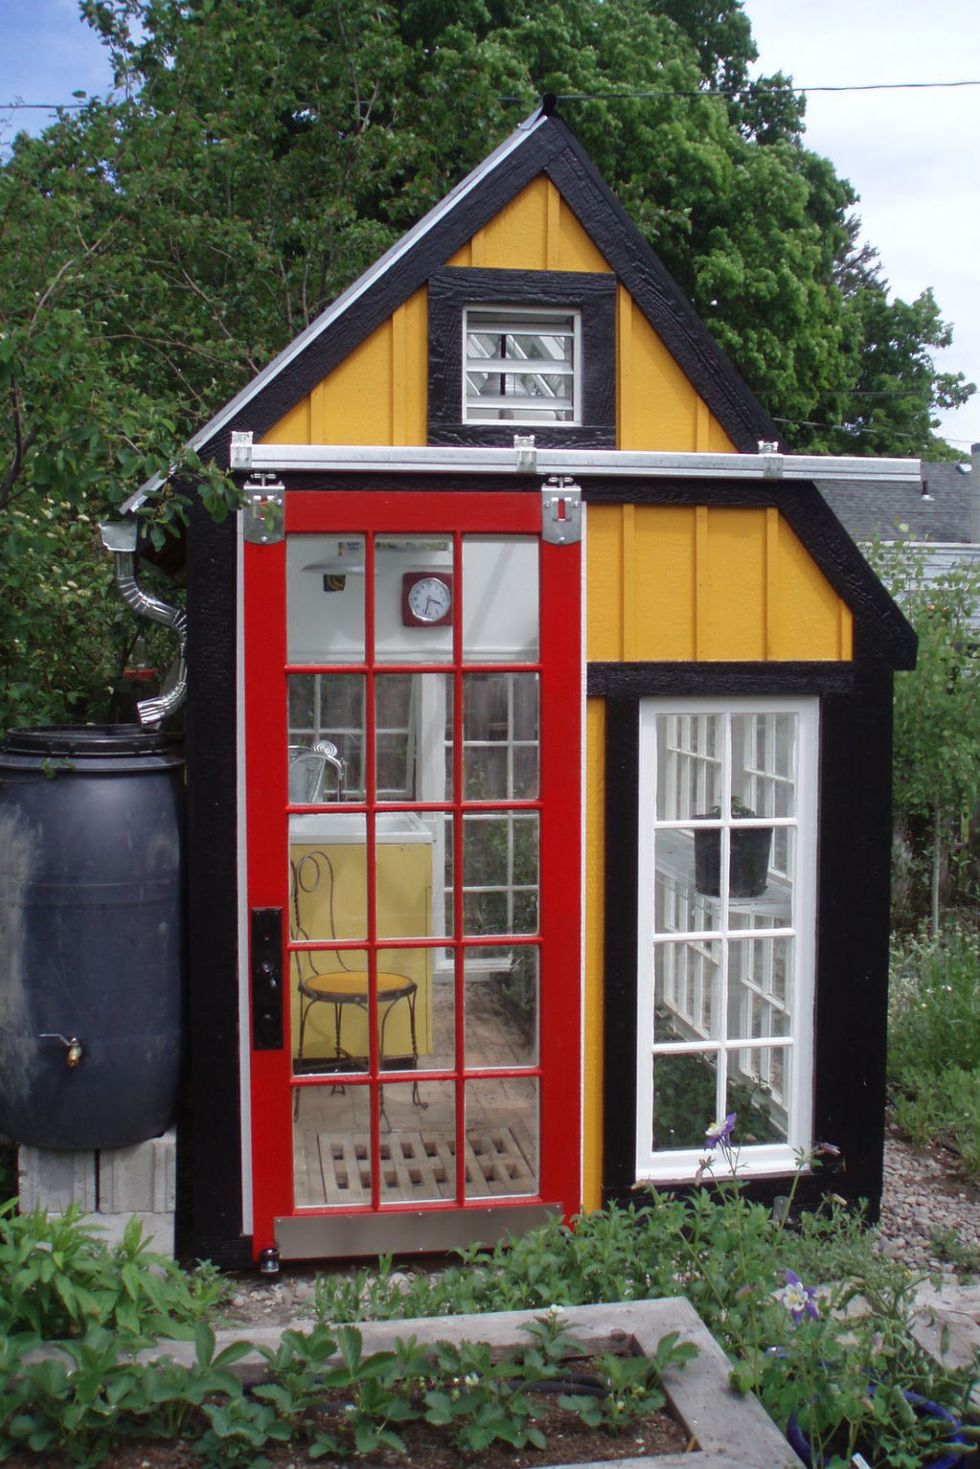 Telephone booth, Building, Shed, House, Outdoor structure, Payphone, Garden buildings, 